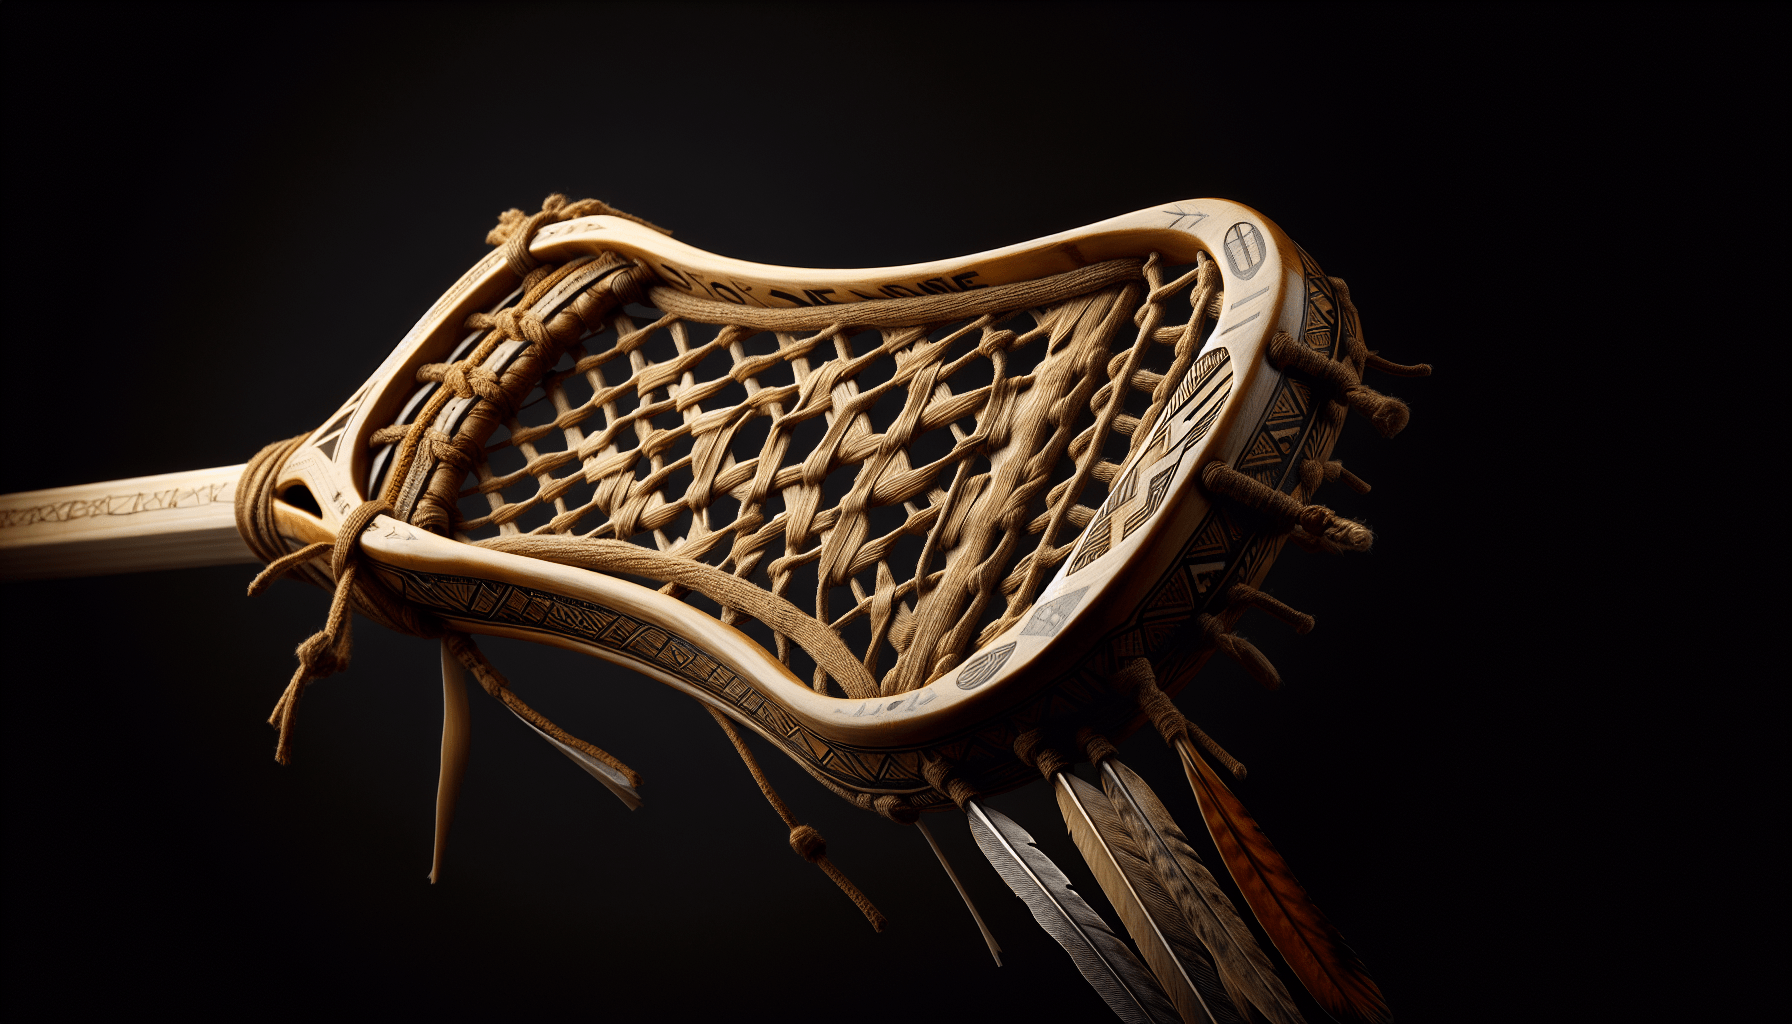 Does Lacrosse Have Native American Roots?